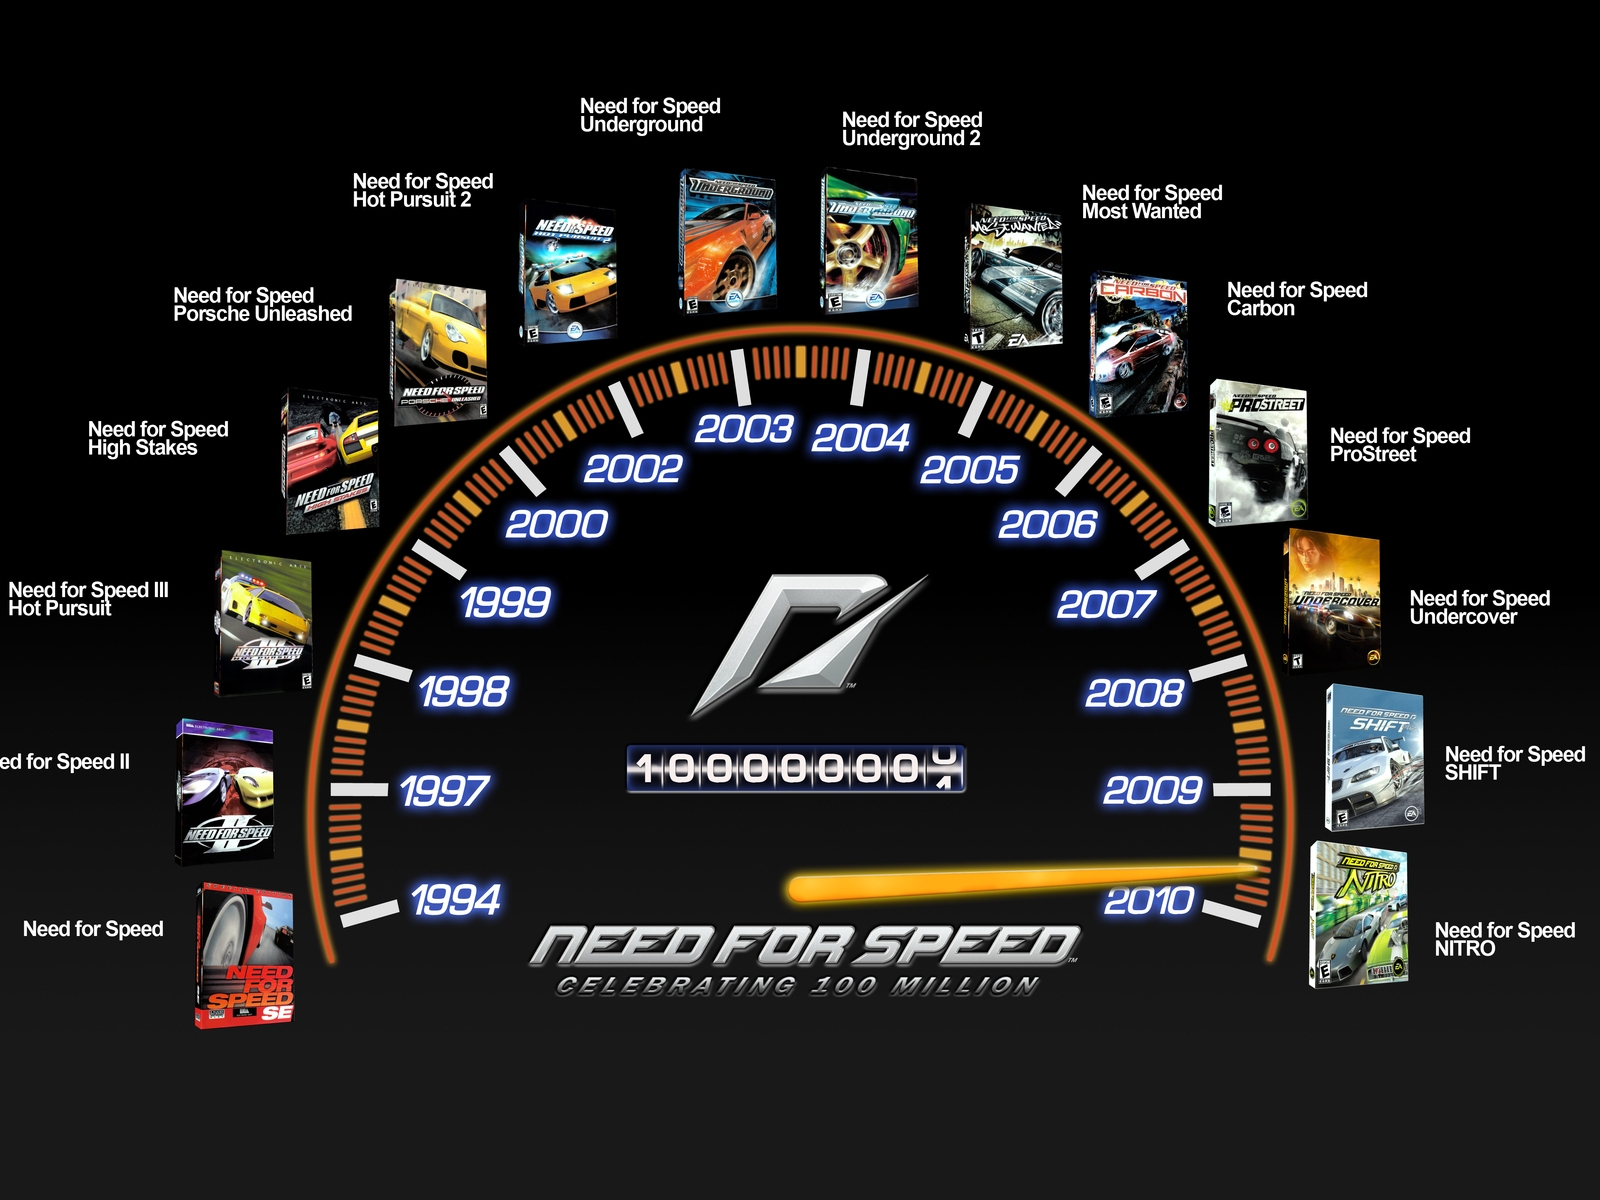 Need for Speed Celebration for 1600 x 1200 resolution